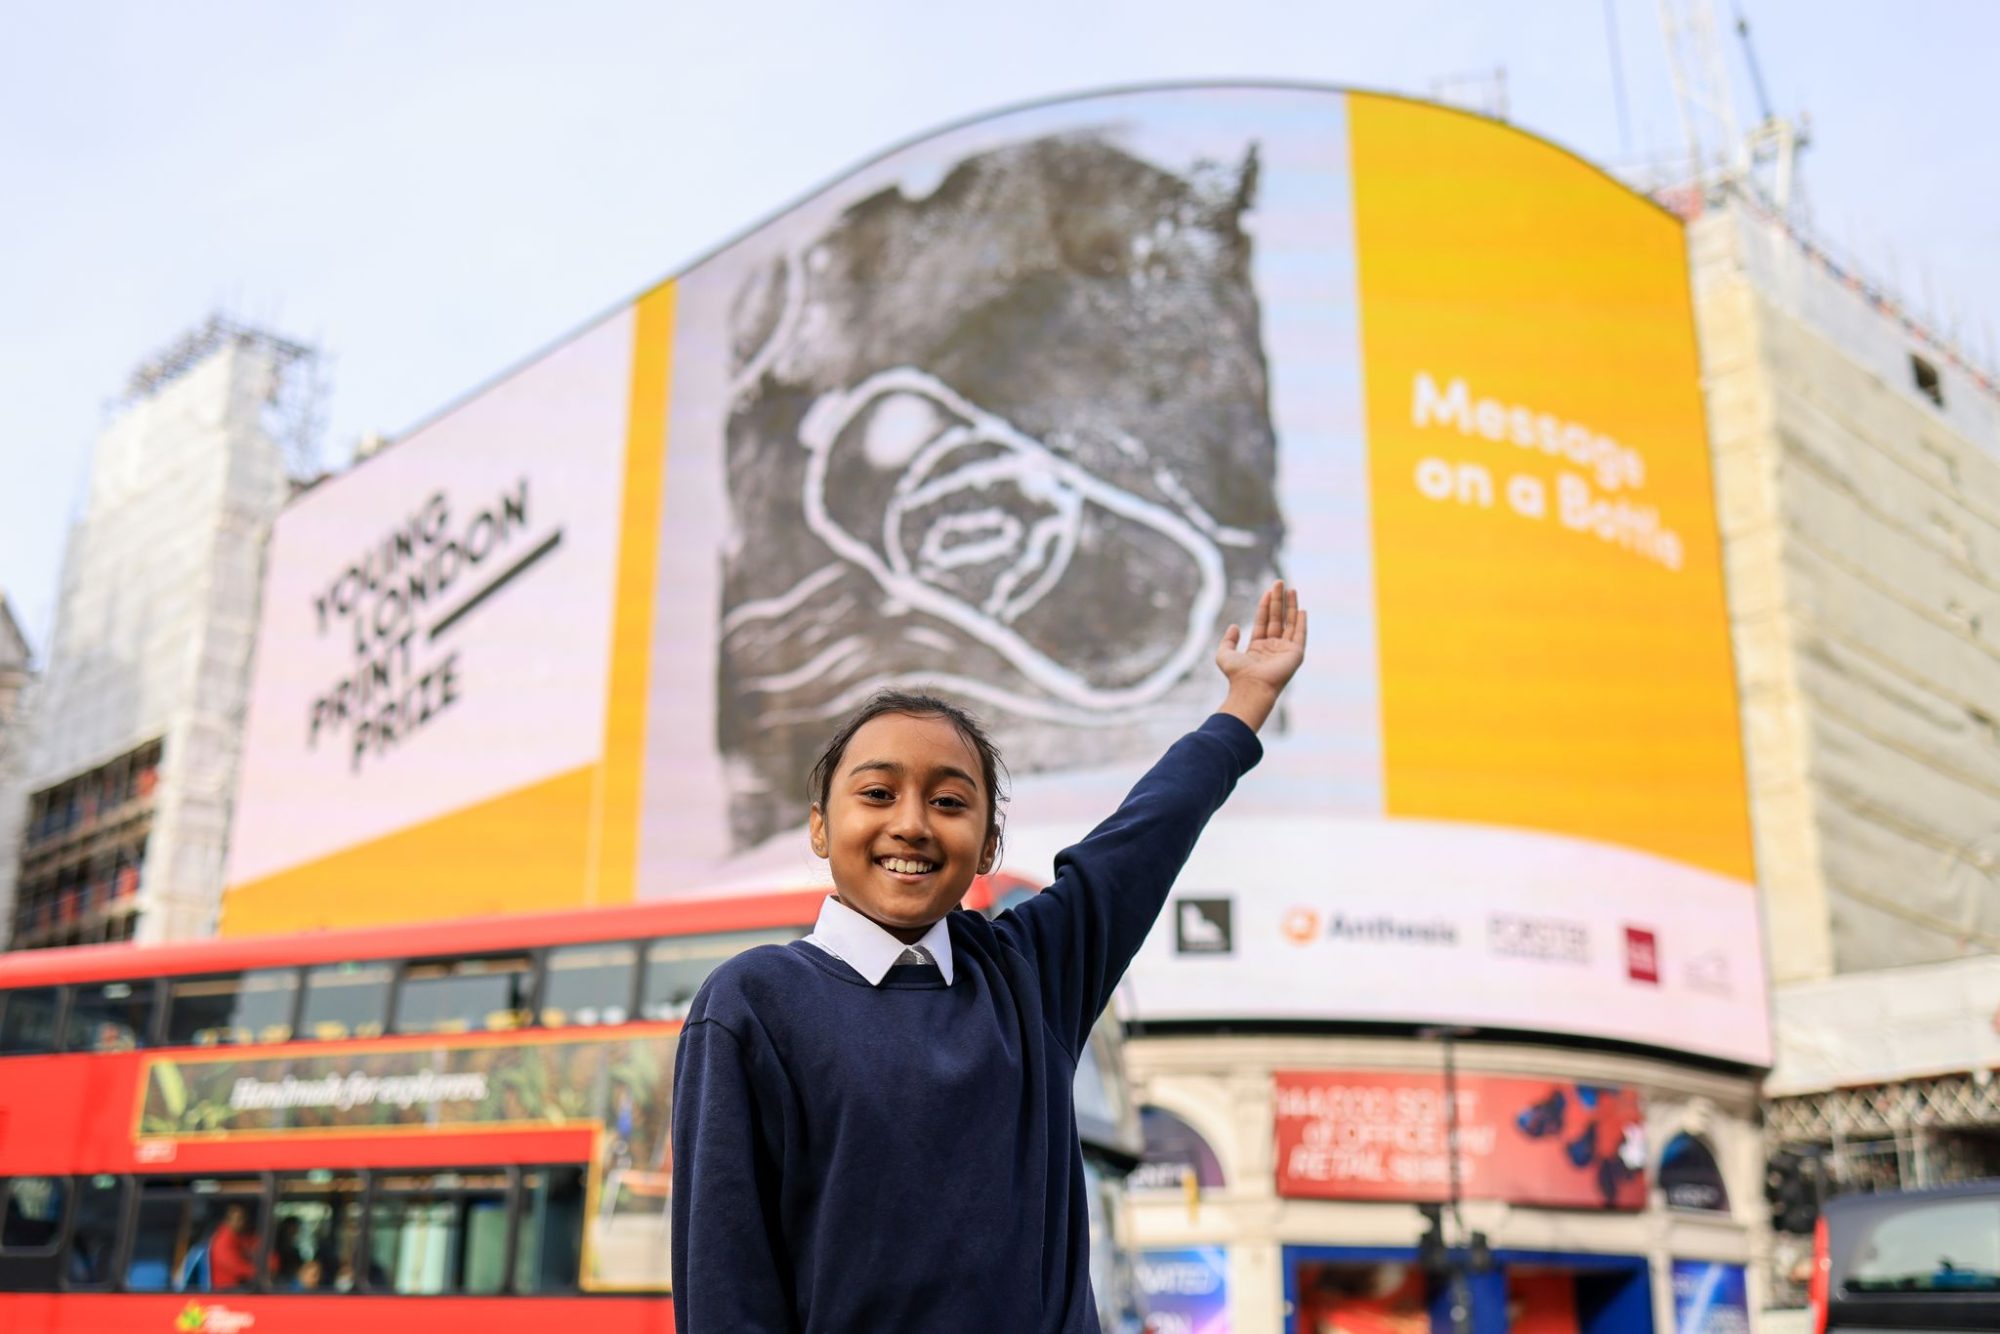 Sara Ahmed, winnner of YLPP2022, at the Piccadilly Lights